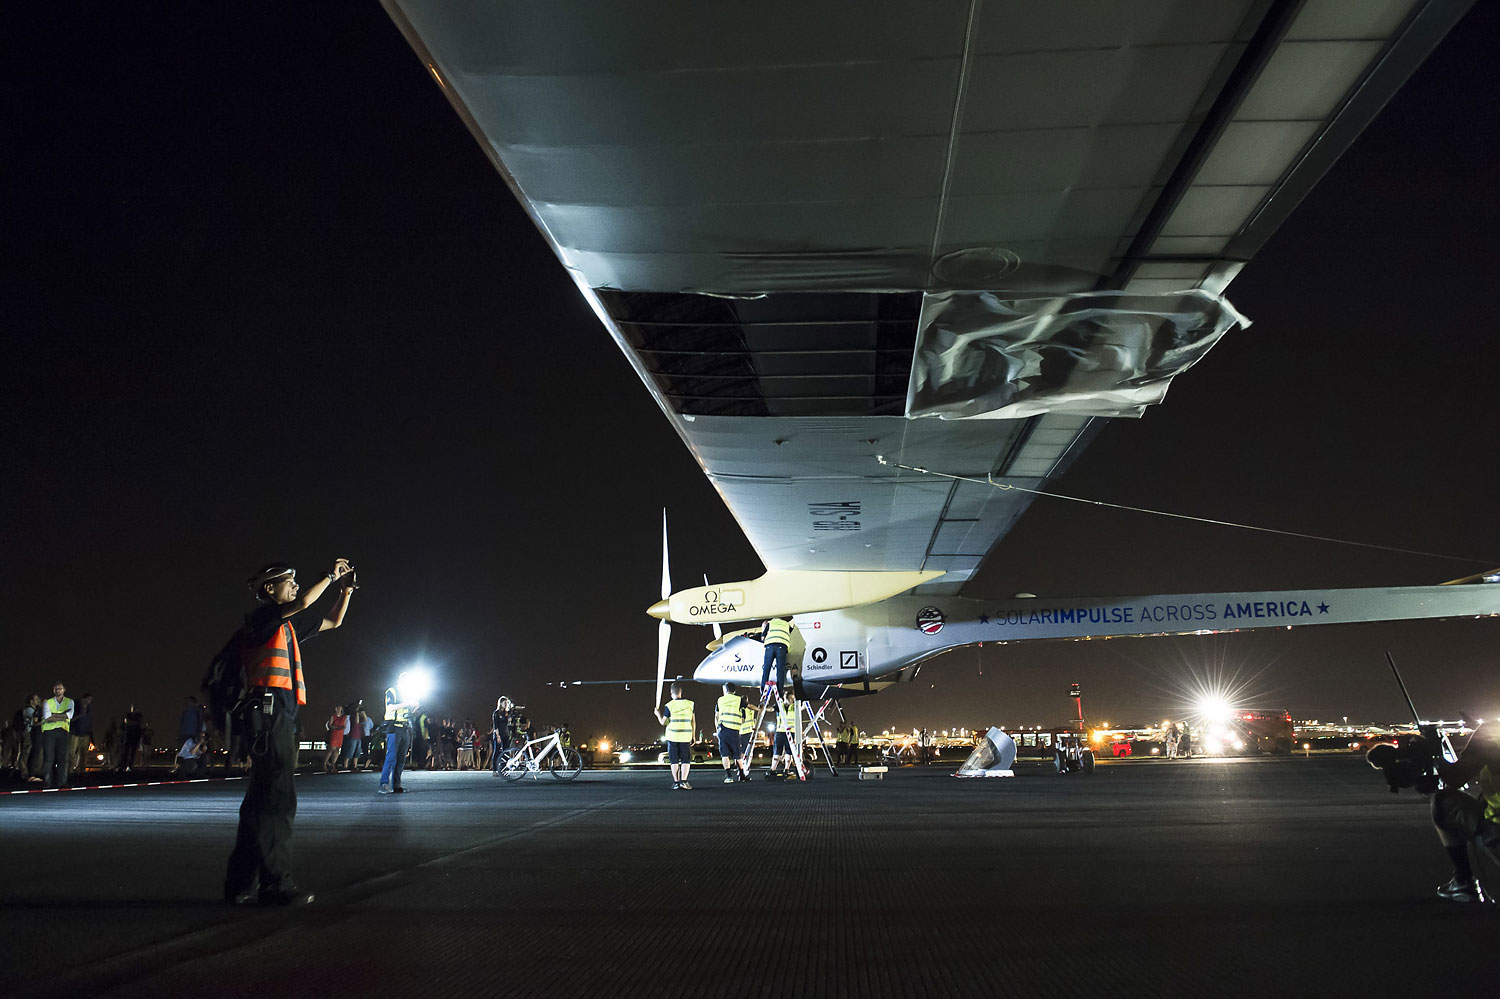 A tear in the wing fabric of the Solar Impulse airplane following landing at John F. Kennedy International Airport in New York, July 6, 2013.